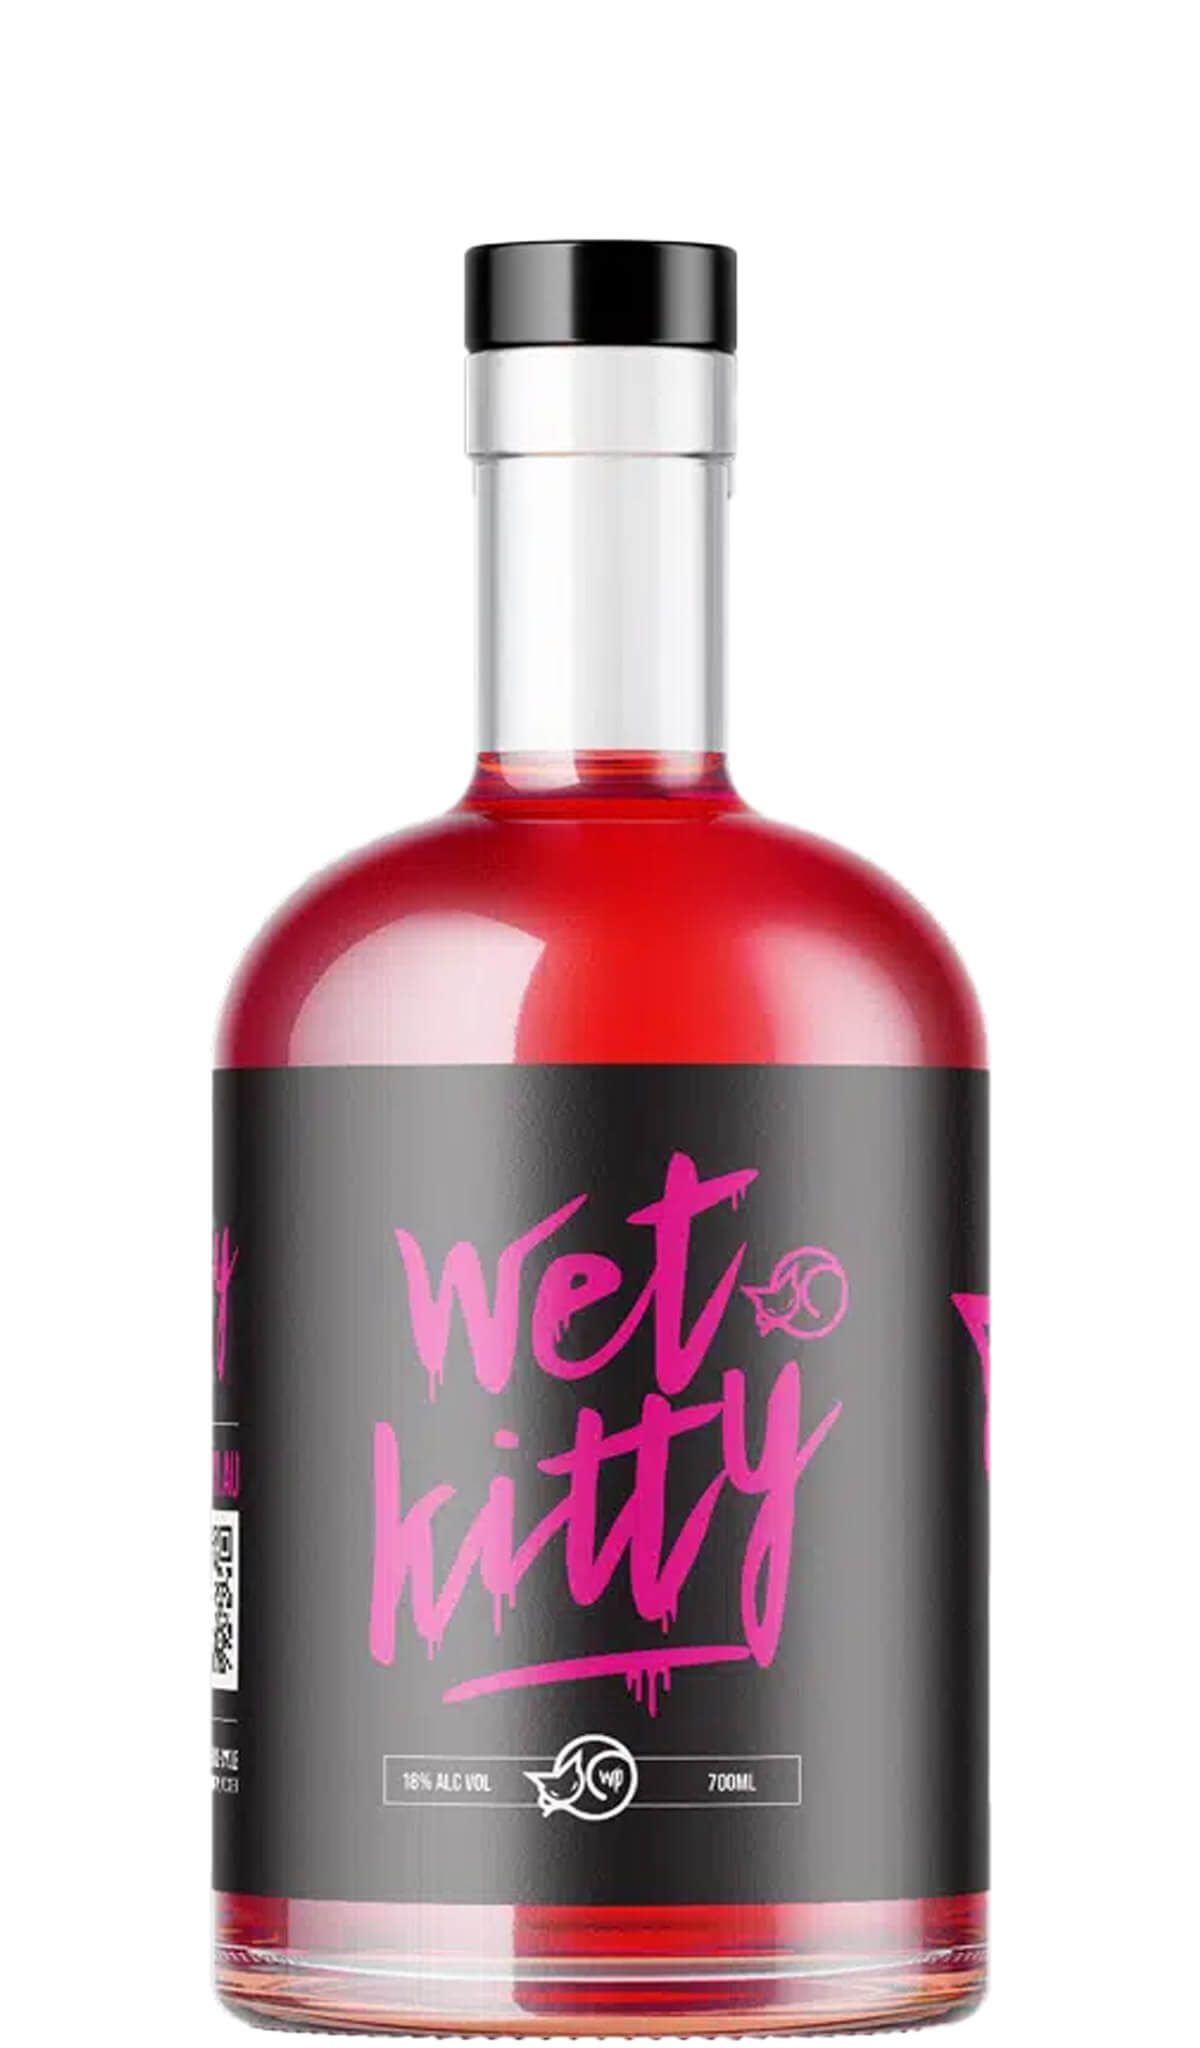 Find out more or buy Wet Kitty the Wet Pussy Blended Cocktail Shot 700mL online at Wine Sellers Direct - Australia’s independent liquor specialists.